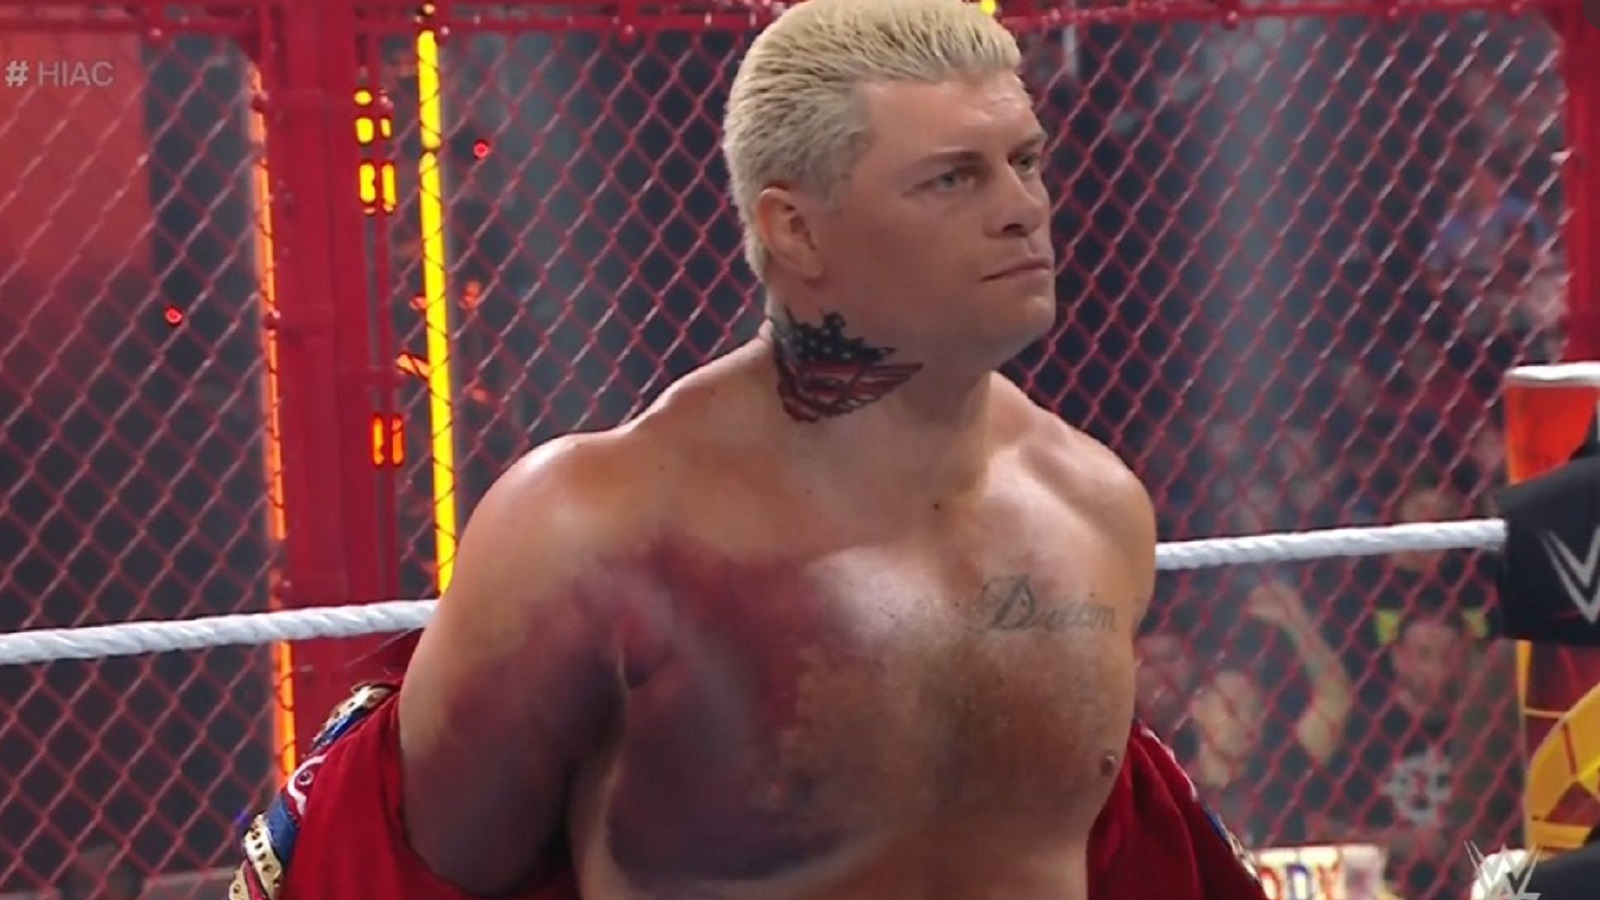 Cody Rhodes wrestled with an absolutely nasty torn pec muscle.